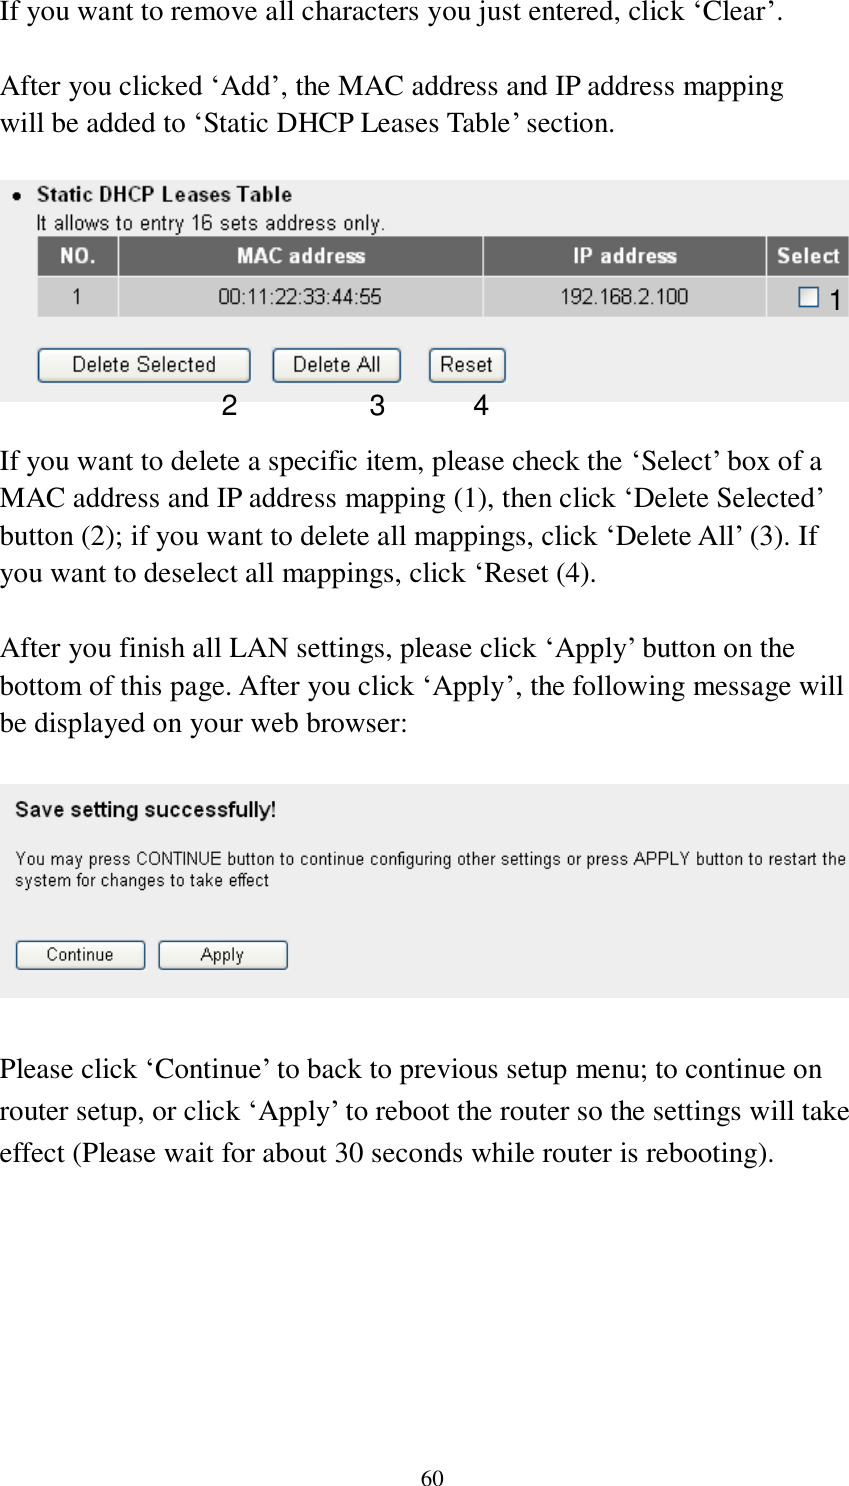 60 If you want to remove all characters you just entered, click „Clear‟.  After you clicked „Add‟, the MAC address and IP address mapping will be added to „Static DHCP Leases Table‟ section.    If you want to delete a specific item, please check the „Select‟ box of a MAC address and IP address mapping (1), then click „Delete Selected‟ button (2); if you want to delete all mappings, click „Delete All‟ (3). If you want to deselect all mappings, click „Reset (4).  After you finish all LAN settings, please click „Apply‟ button on the bottom of this page. After you click „Apply‟, the following message will be displayed on your web browser:    Please click „Continue‟ to back to previous setup menu; to continue on router setup, or click „Apply‟ to reboot the router so the settings will take effect (Please wait for about 30 seconds while router is rebooting). 1 2 3 4 